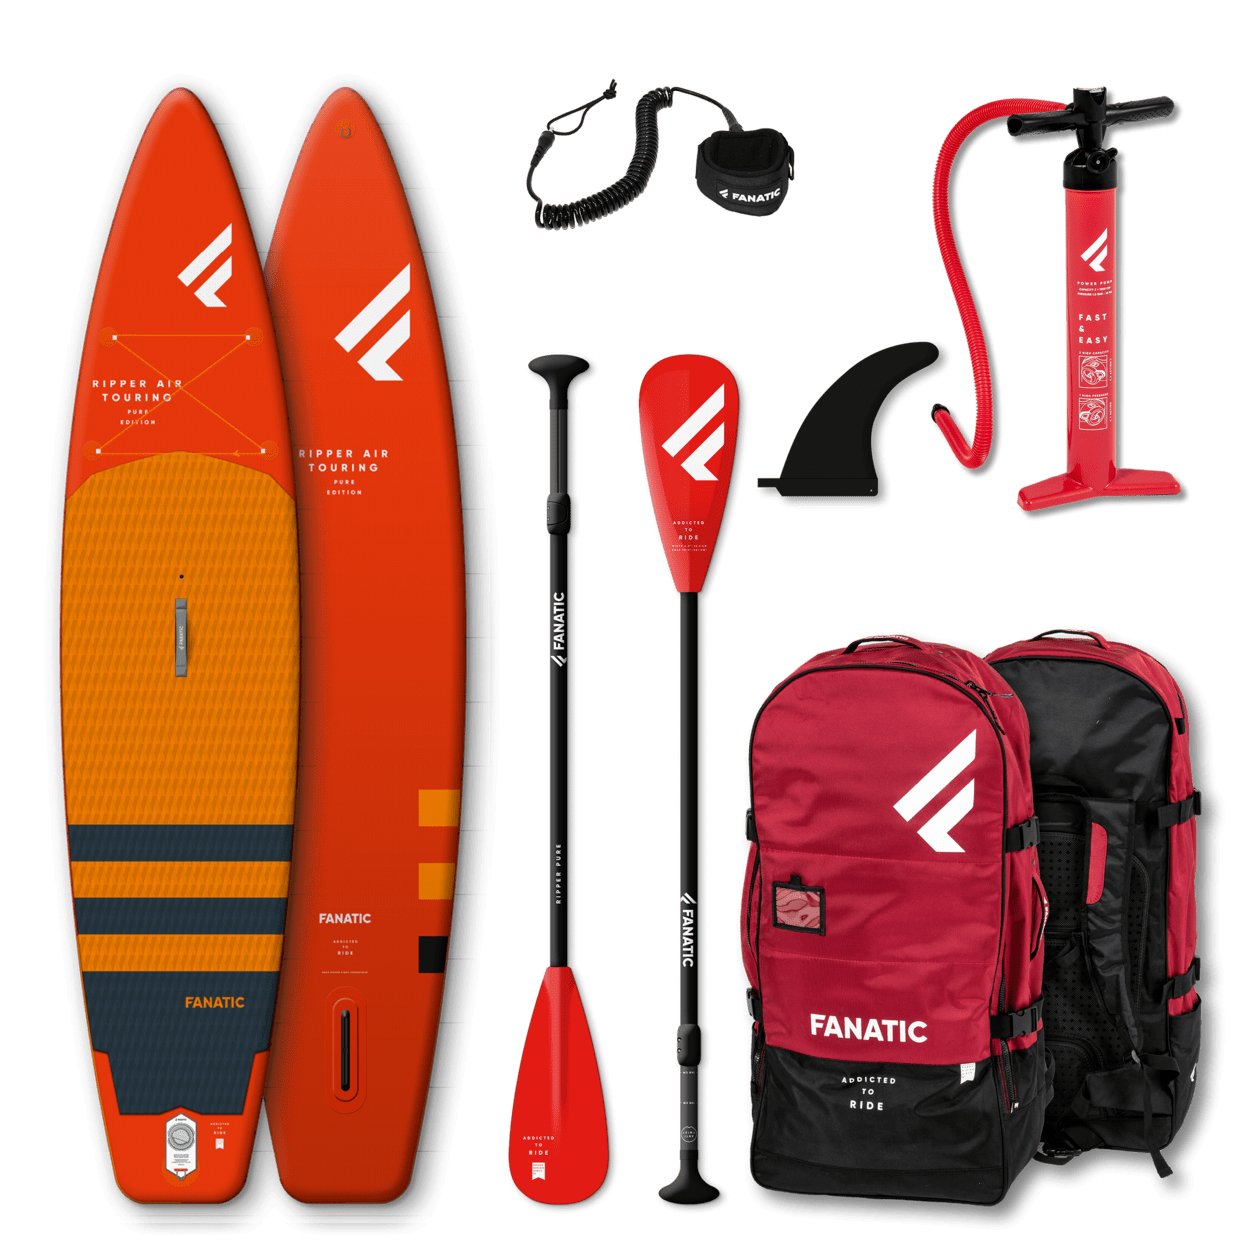 Fanatic Package Ripper Air Touring 2022 iSUP Paddleboard - Worthing Watersports - 9008415938582 - iSUP Packages - Fanatic SUP